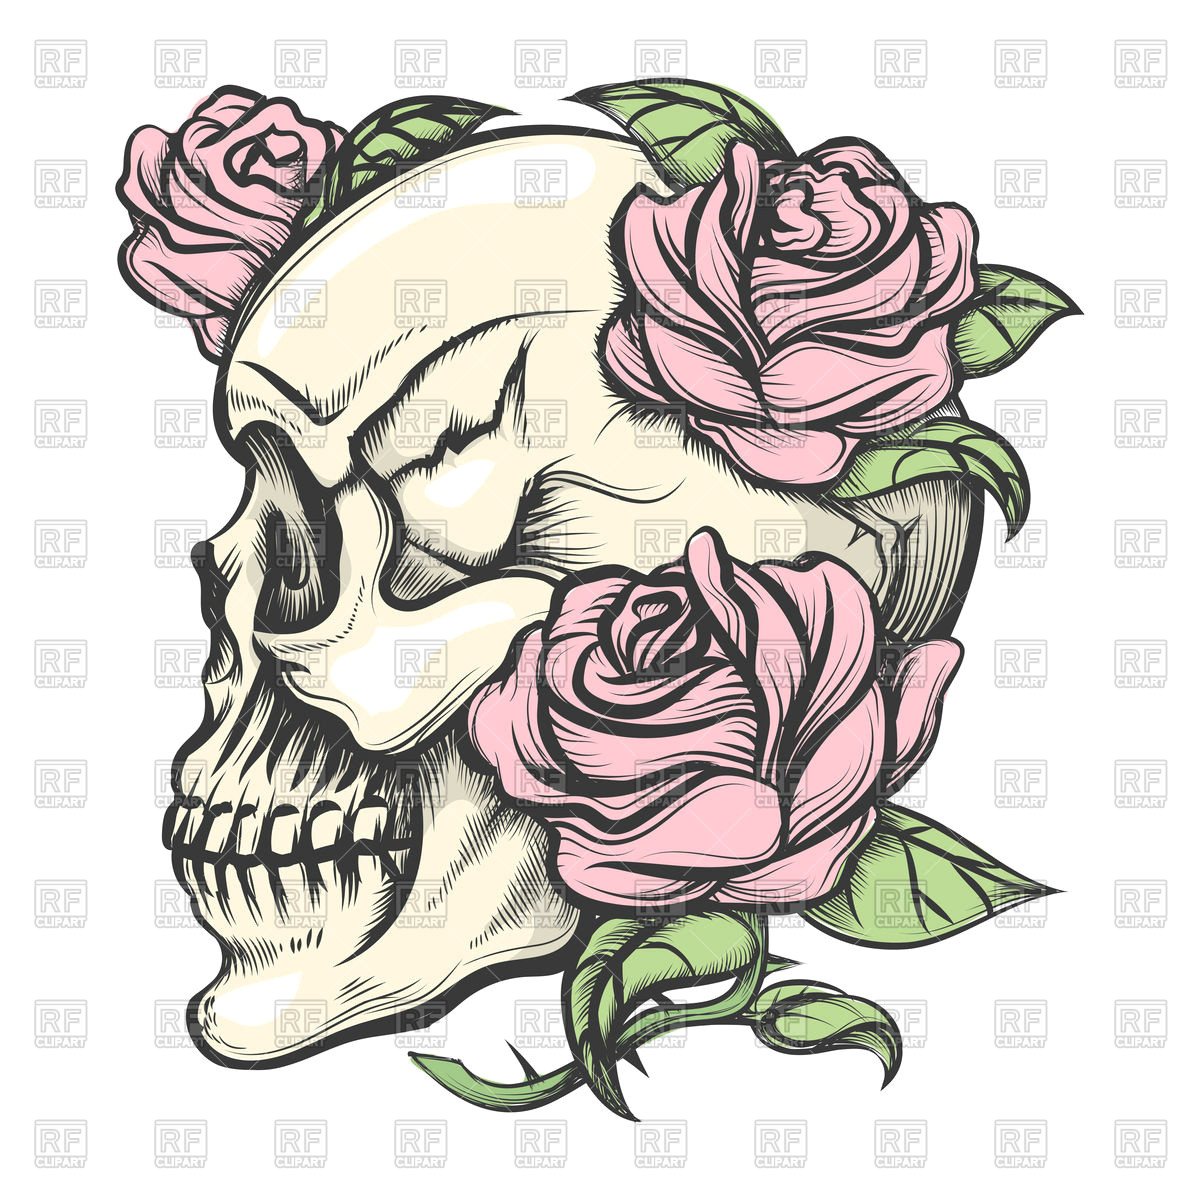 human skull with roses drawn in tattoo style vector image 105236